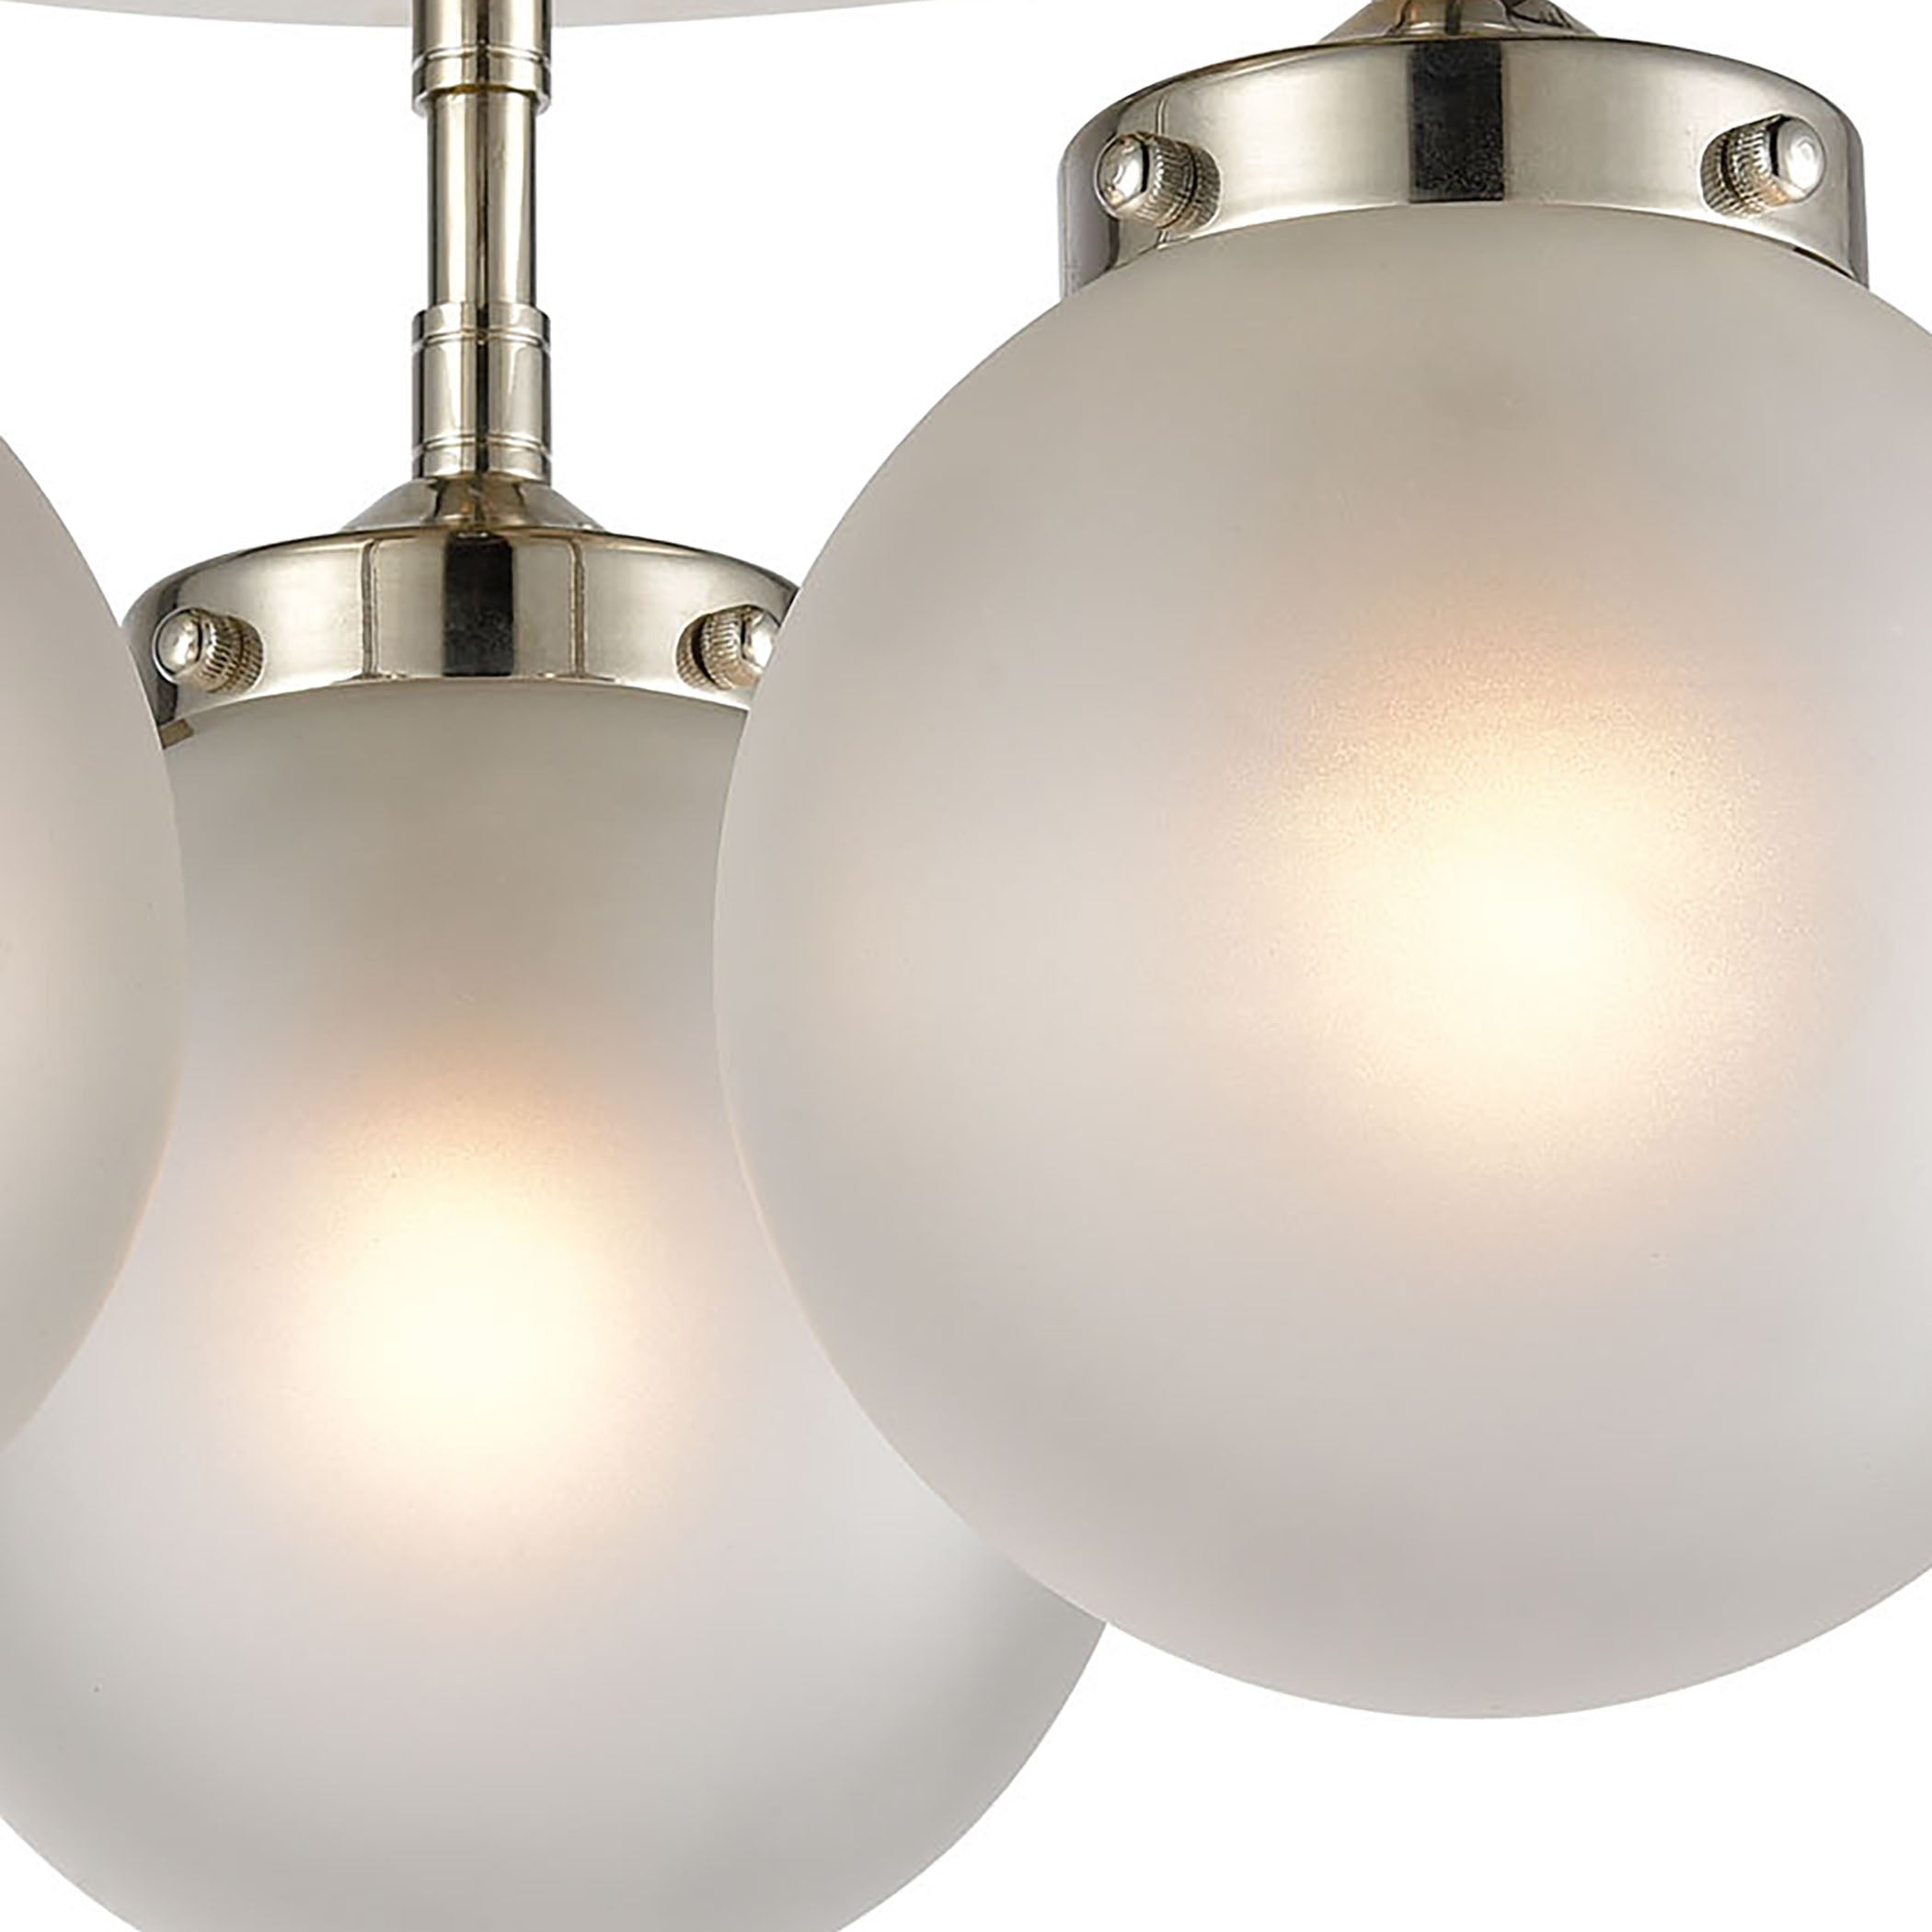 ELK Lighting 15362/3 Boudreaux 3-Light Semi Flush Mount in Polished Nickel with Frosted